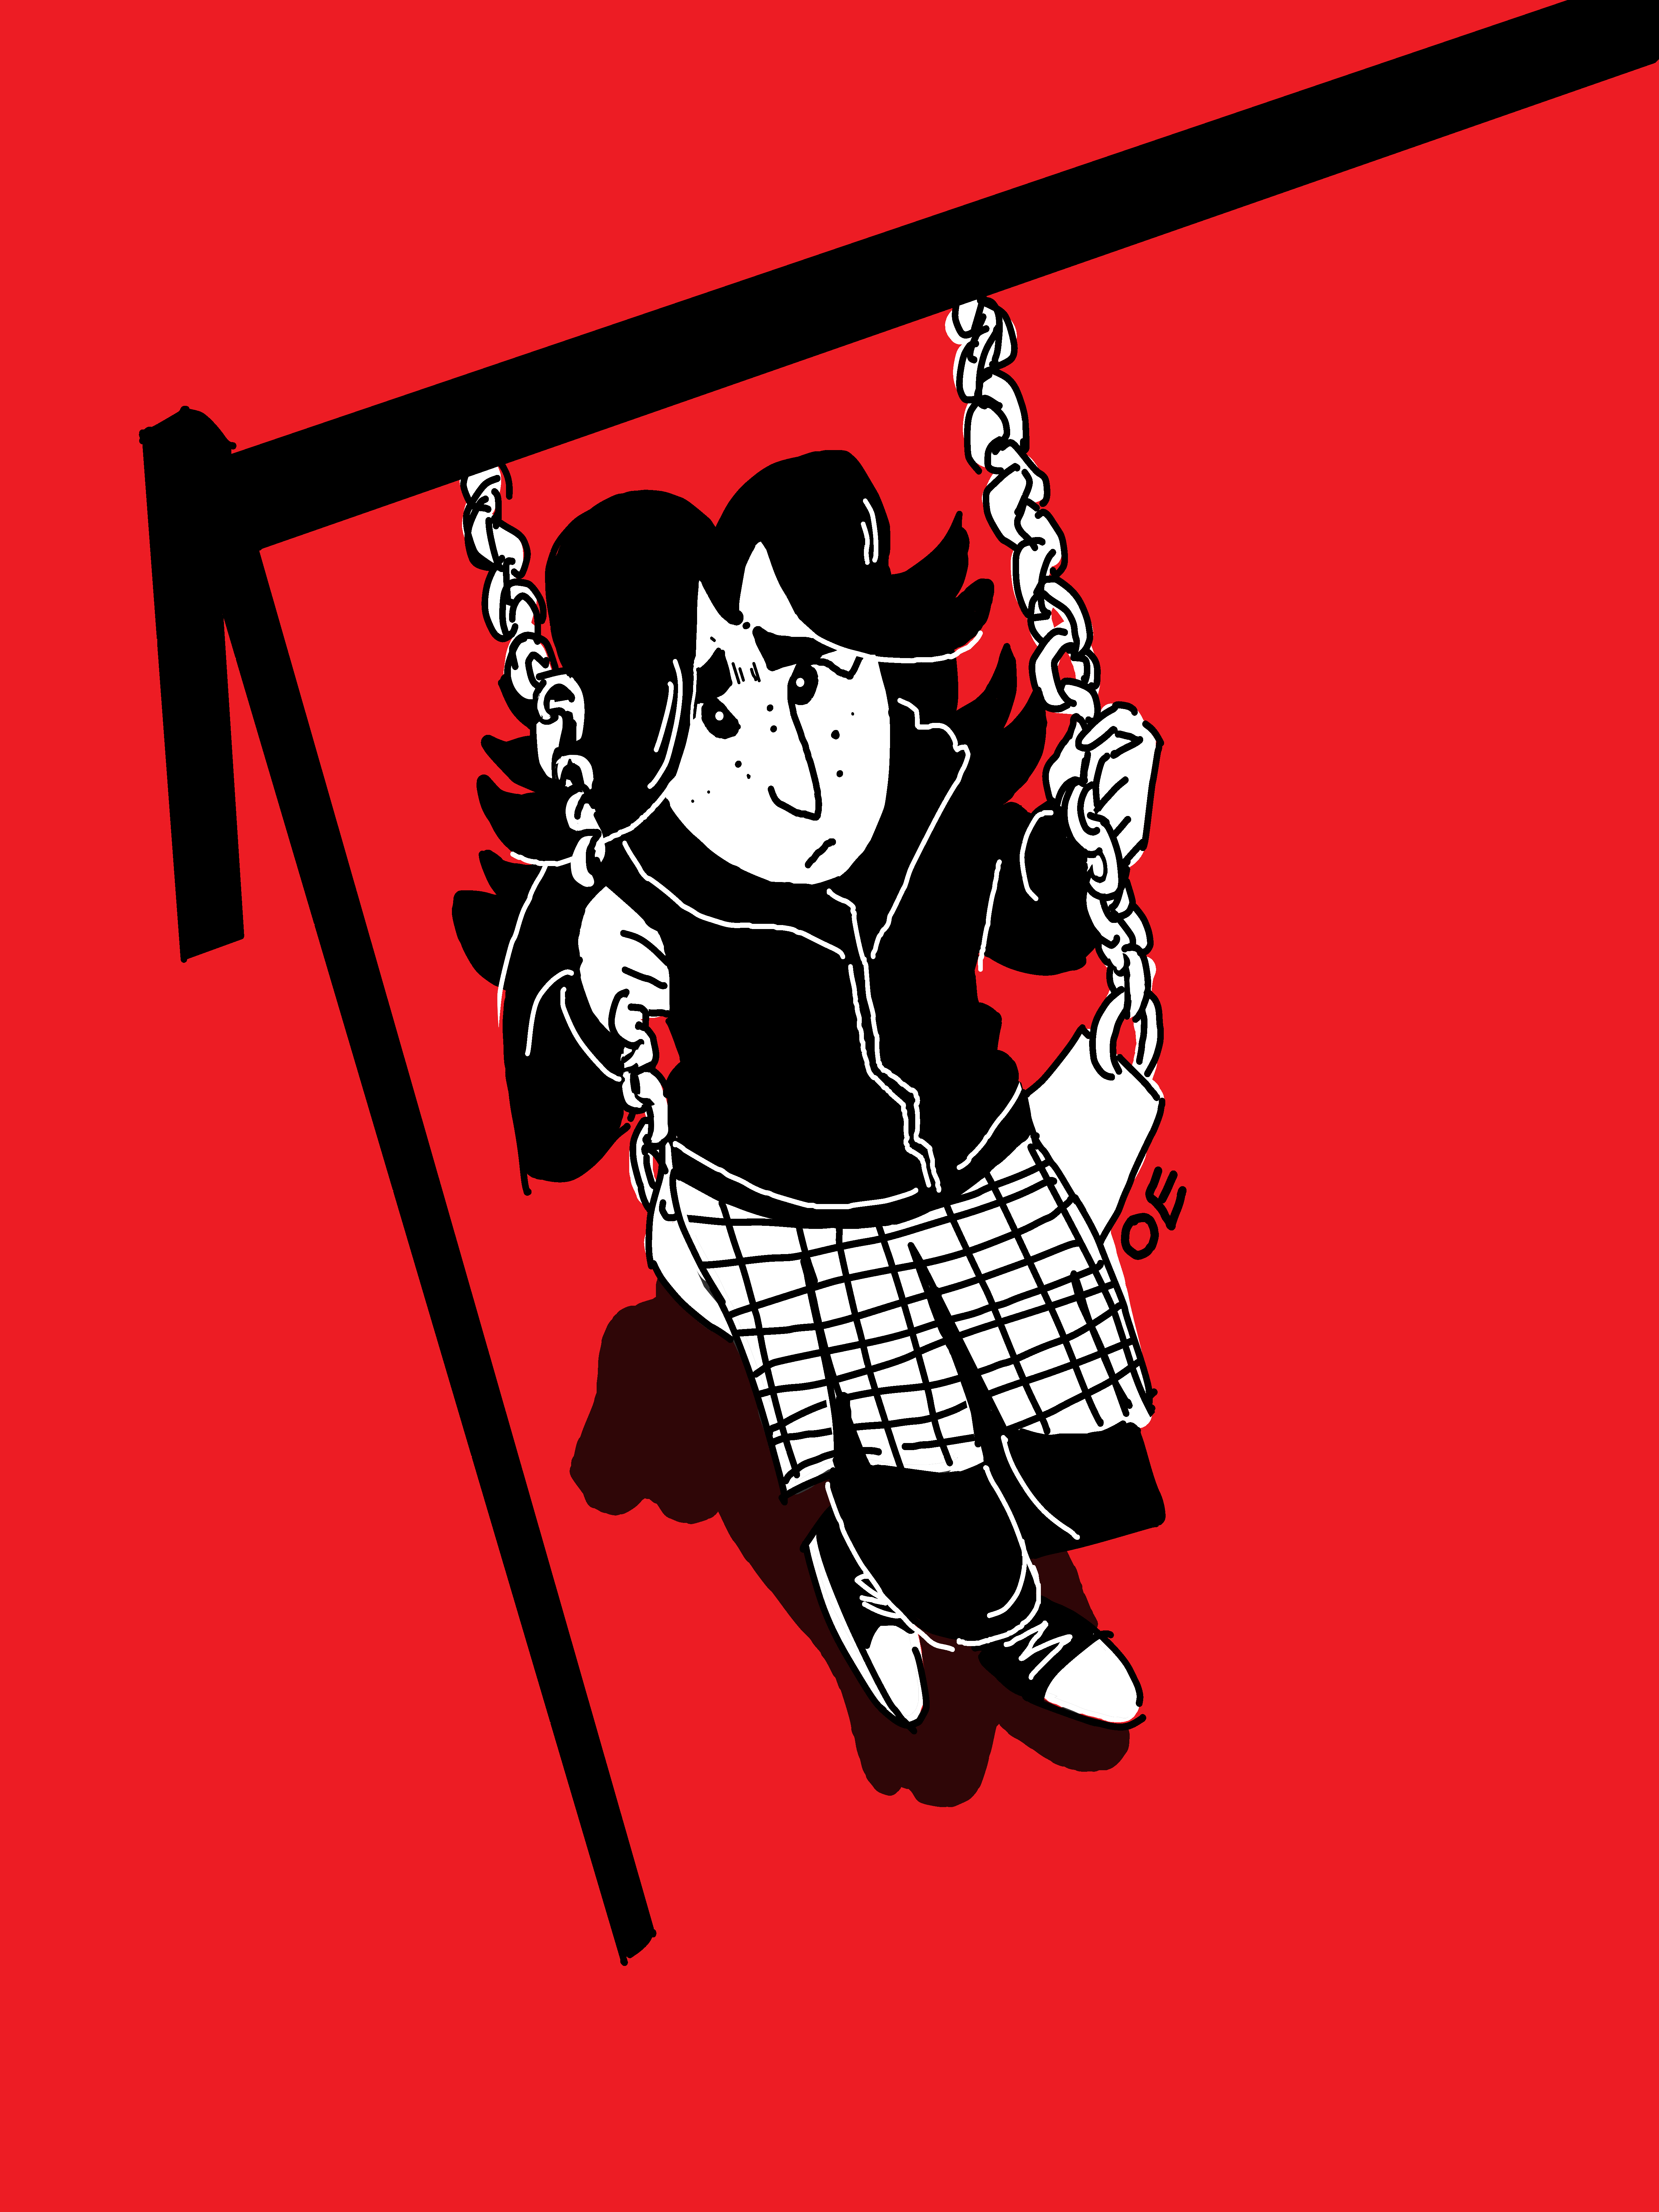 Illustration of the protagonist on a swingset, against a red background, staring up at the sky